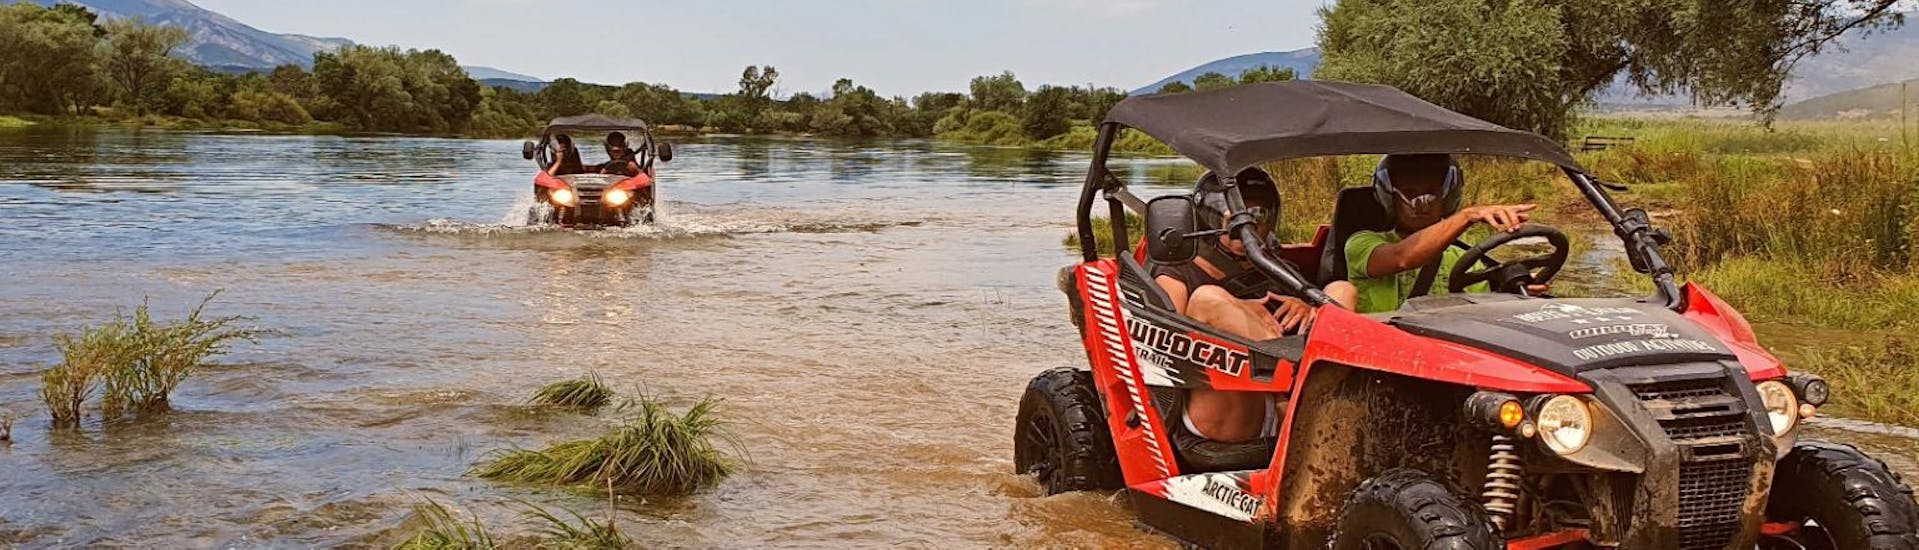 Participants of Cetina River Extreme Buggy Tour from Sinj organised by Hotel Alkar are driving through a river.